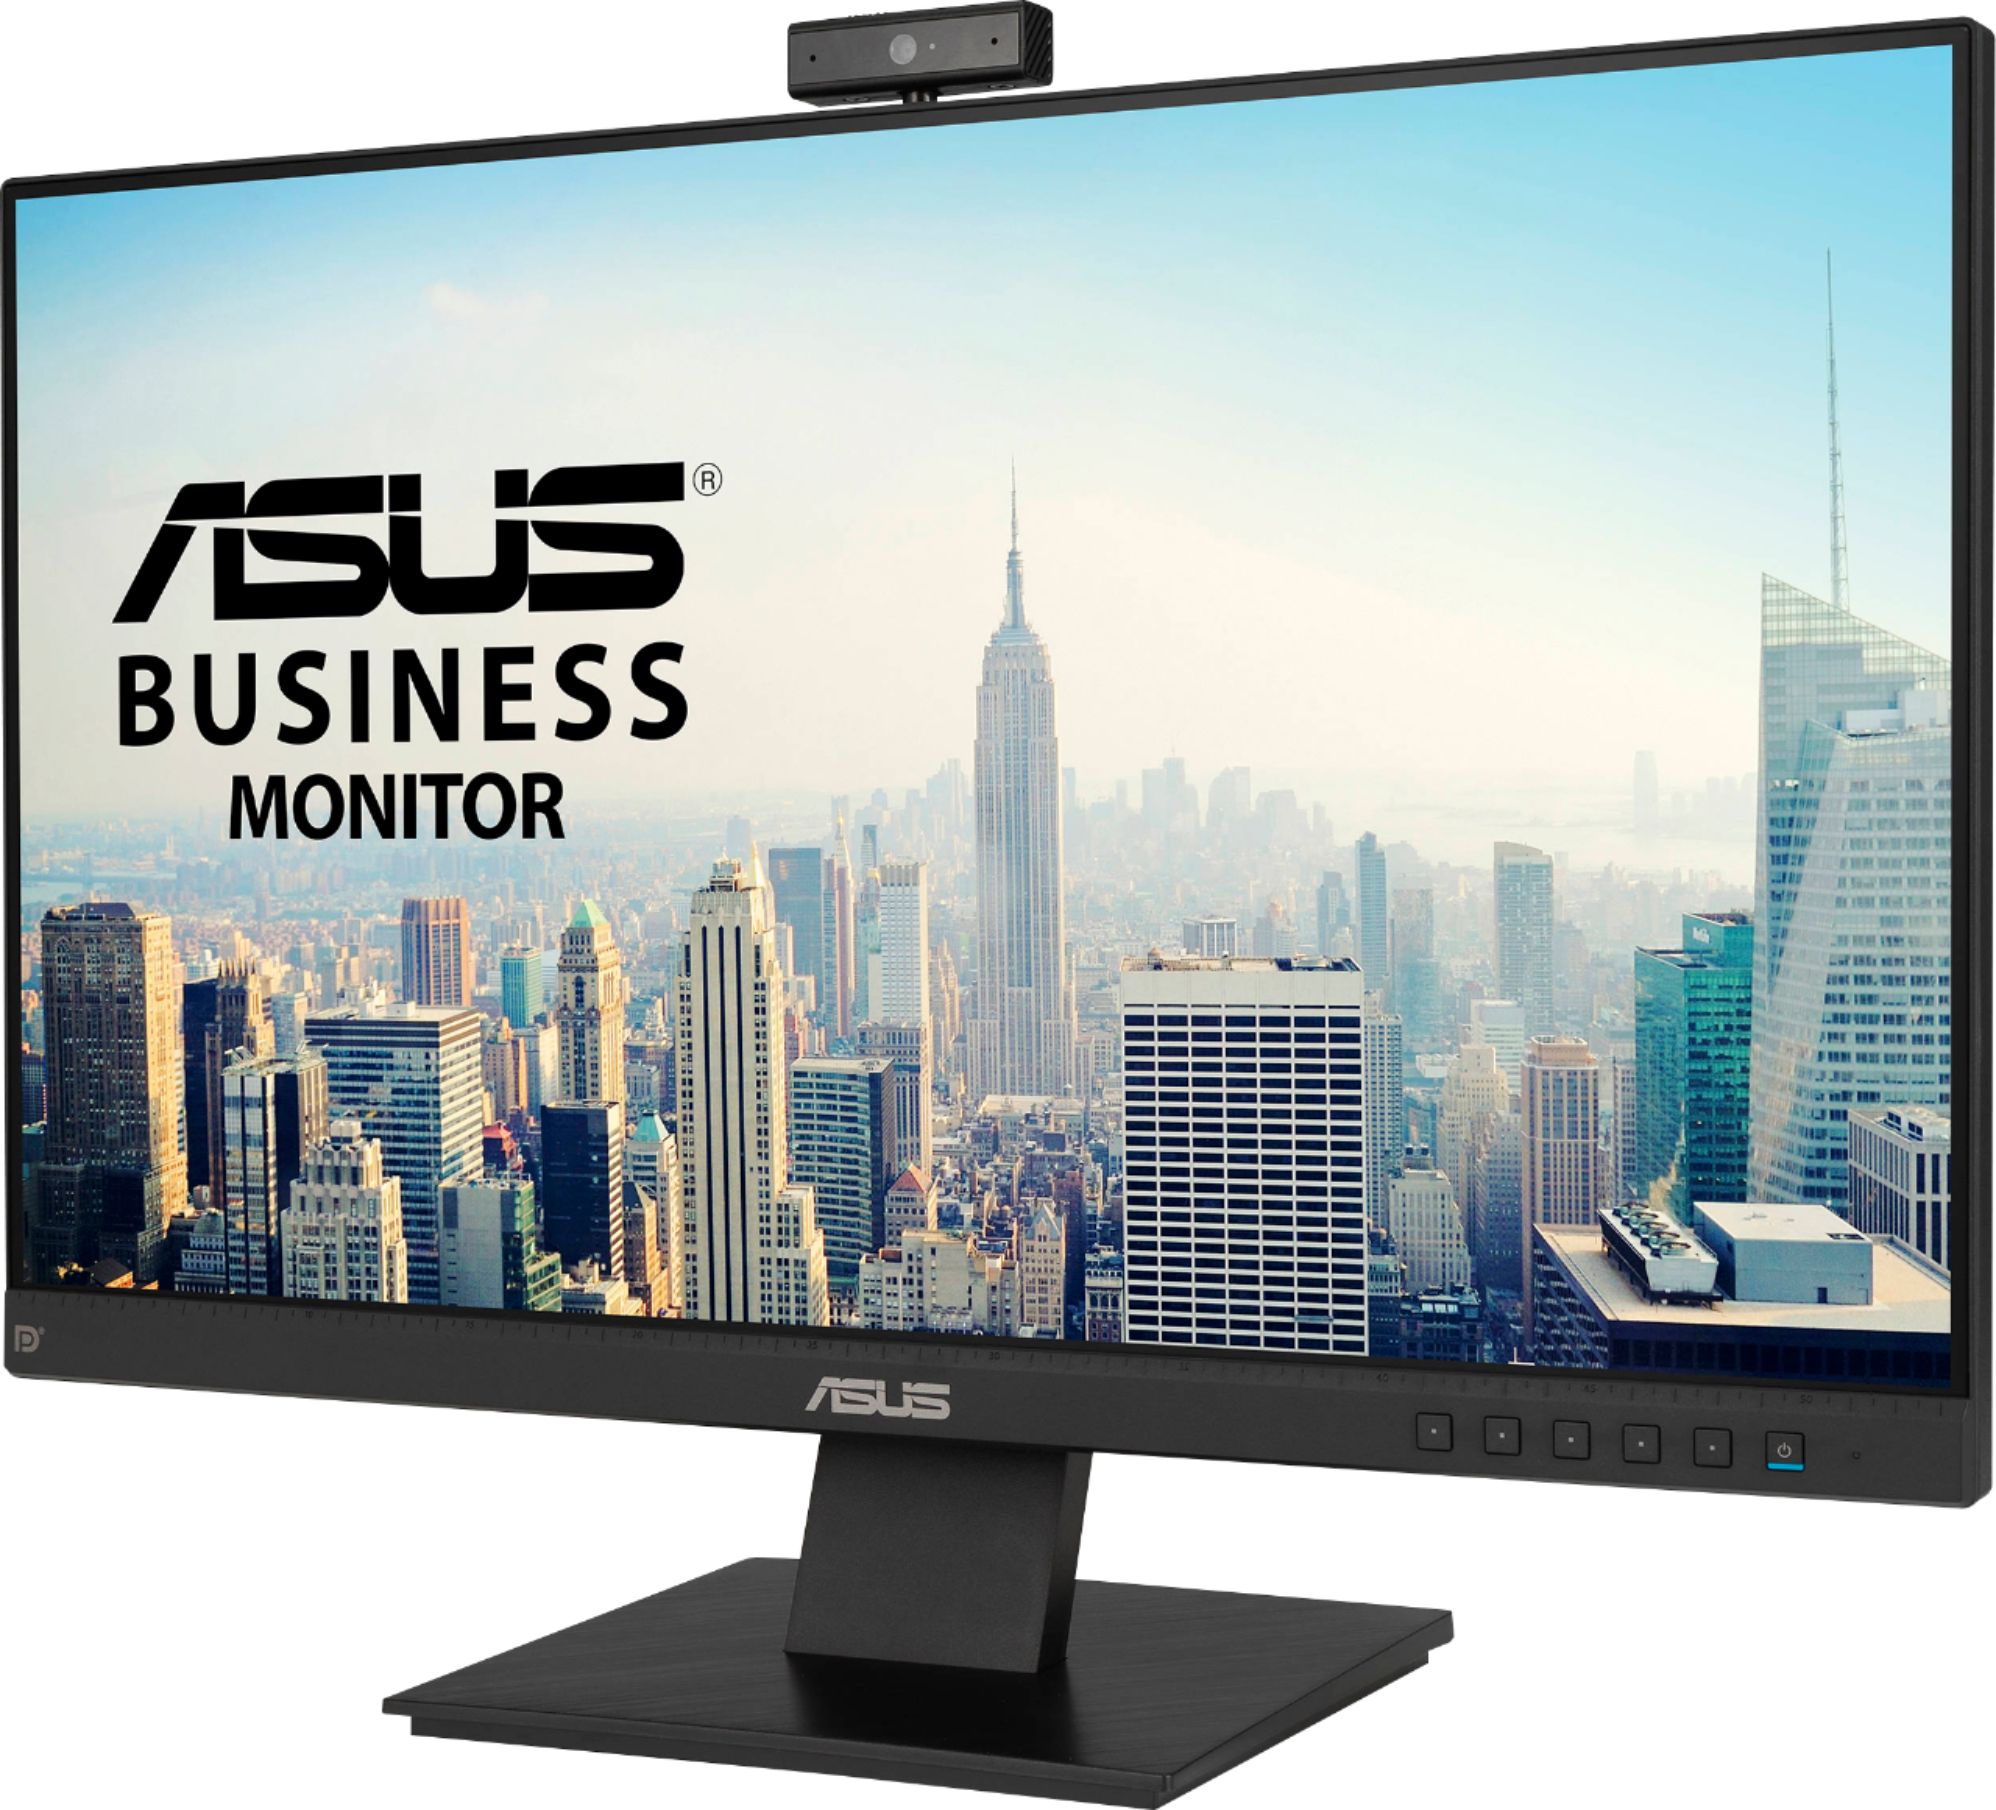 Angle View: ASUS - 23.8" FHD IPS Video Conference Business Monitor with Webcam (DisplayPort,HDMI) - Black